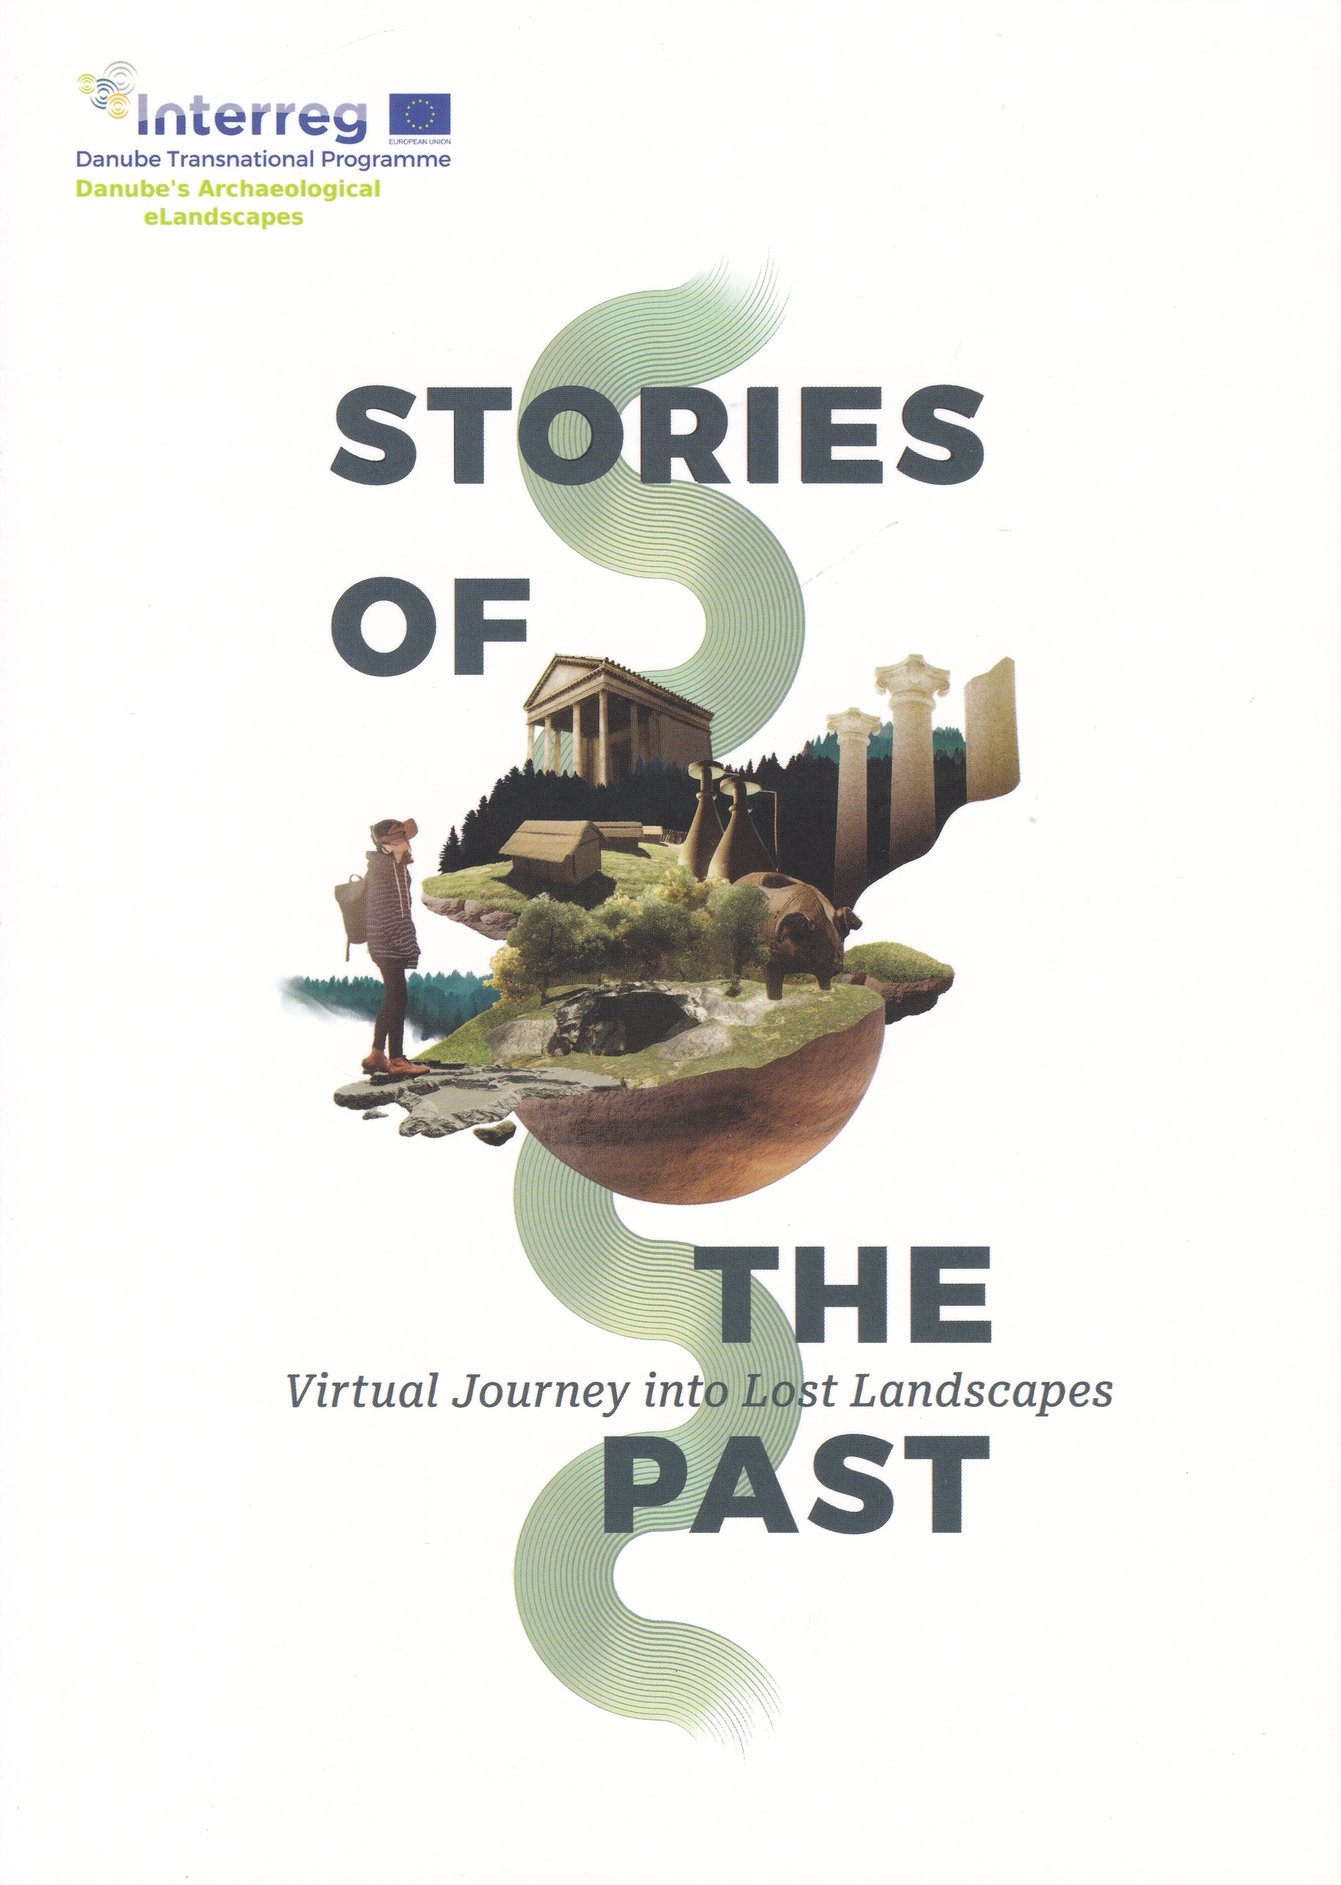 Stories of the Past. Virtual Journey into Lost Landscapes (Rippl-Rónai Múzeum CC BY-NC-ND)